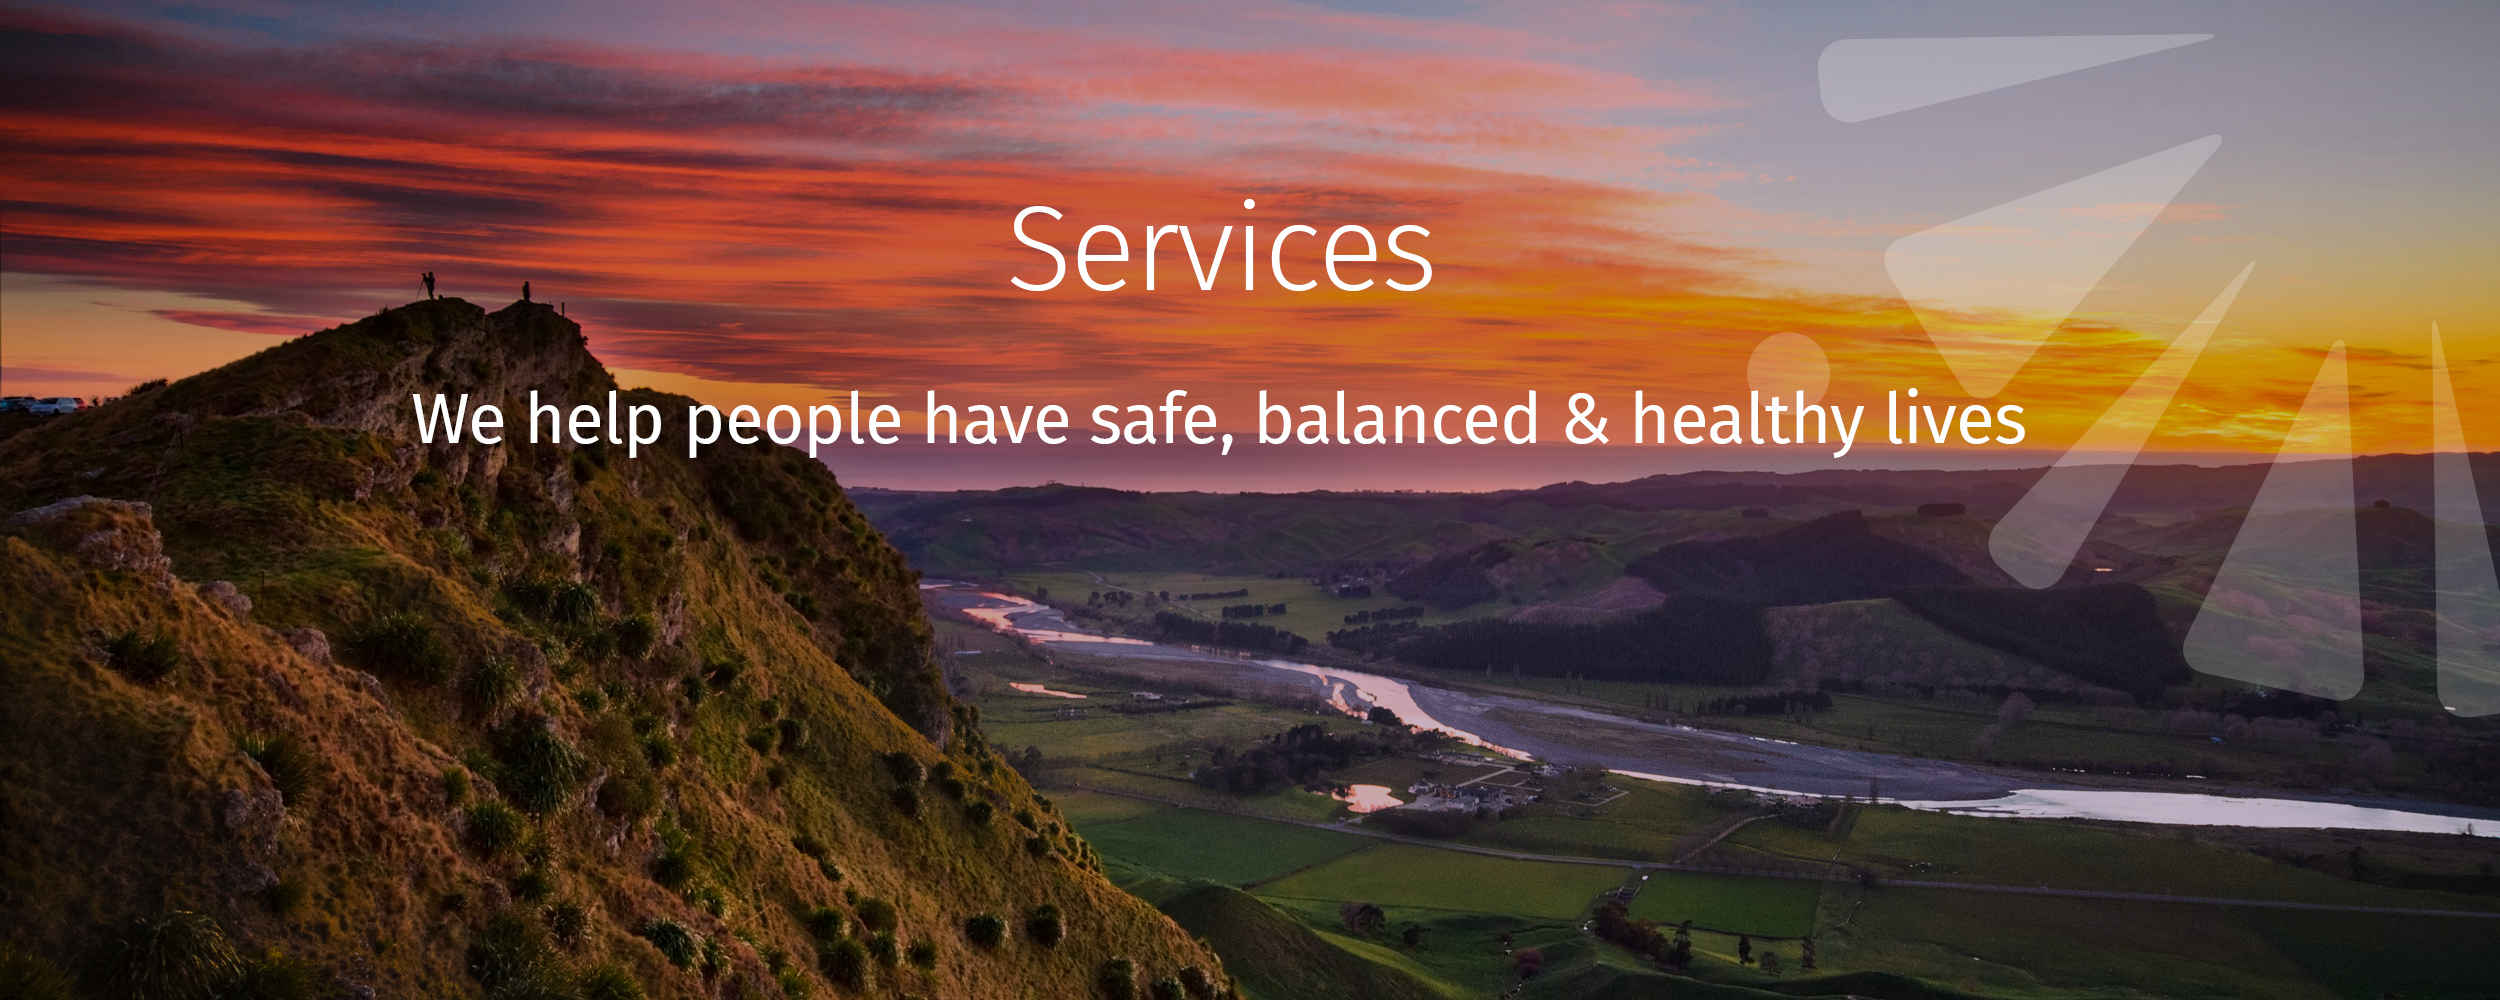 We are about helping people have safe, balanced & healthy lives... at Safe Network we provide specialised therapeutic services for individuals who have engaged in concerning, problematic, or harmful sexual behaviour